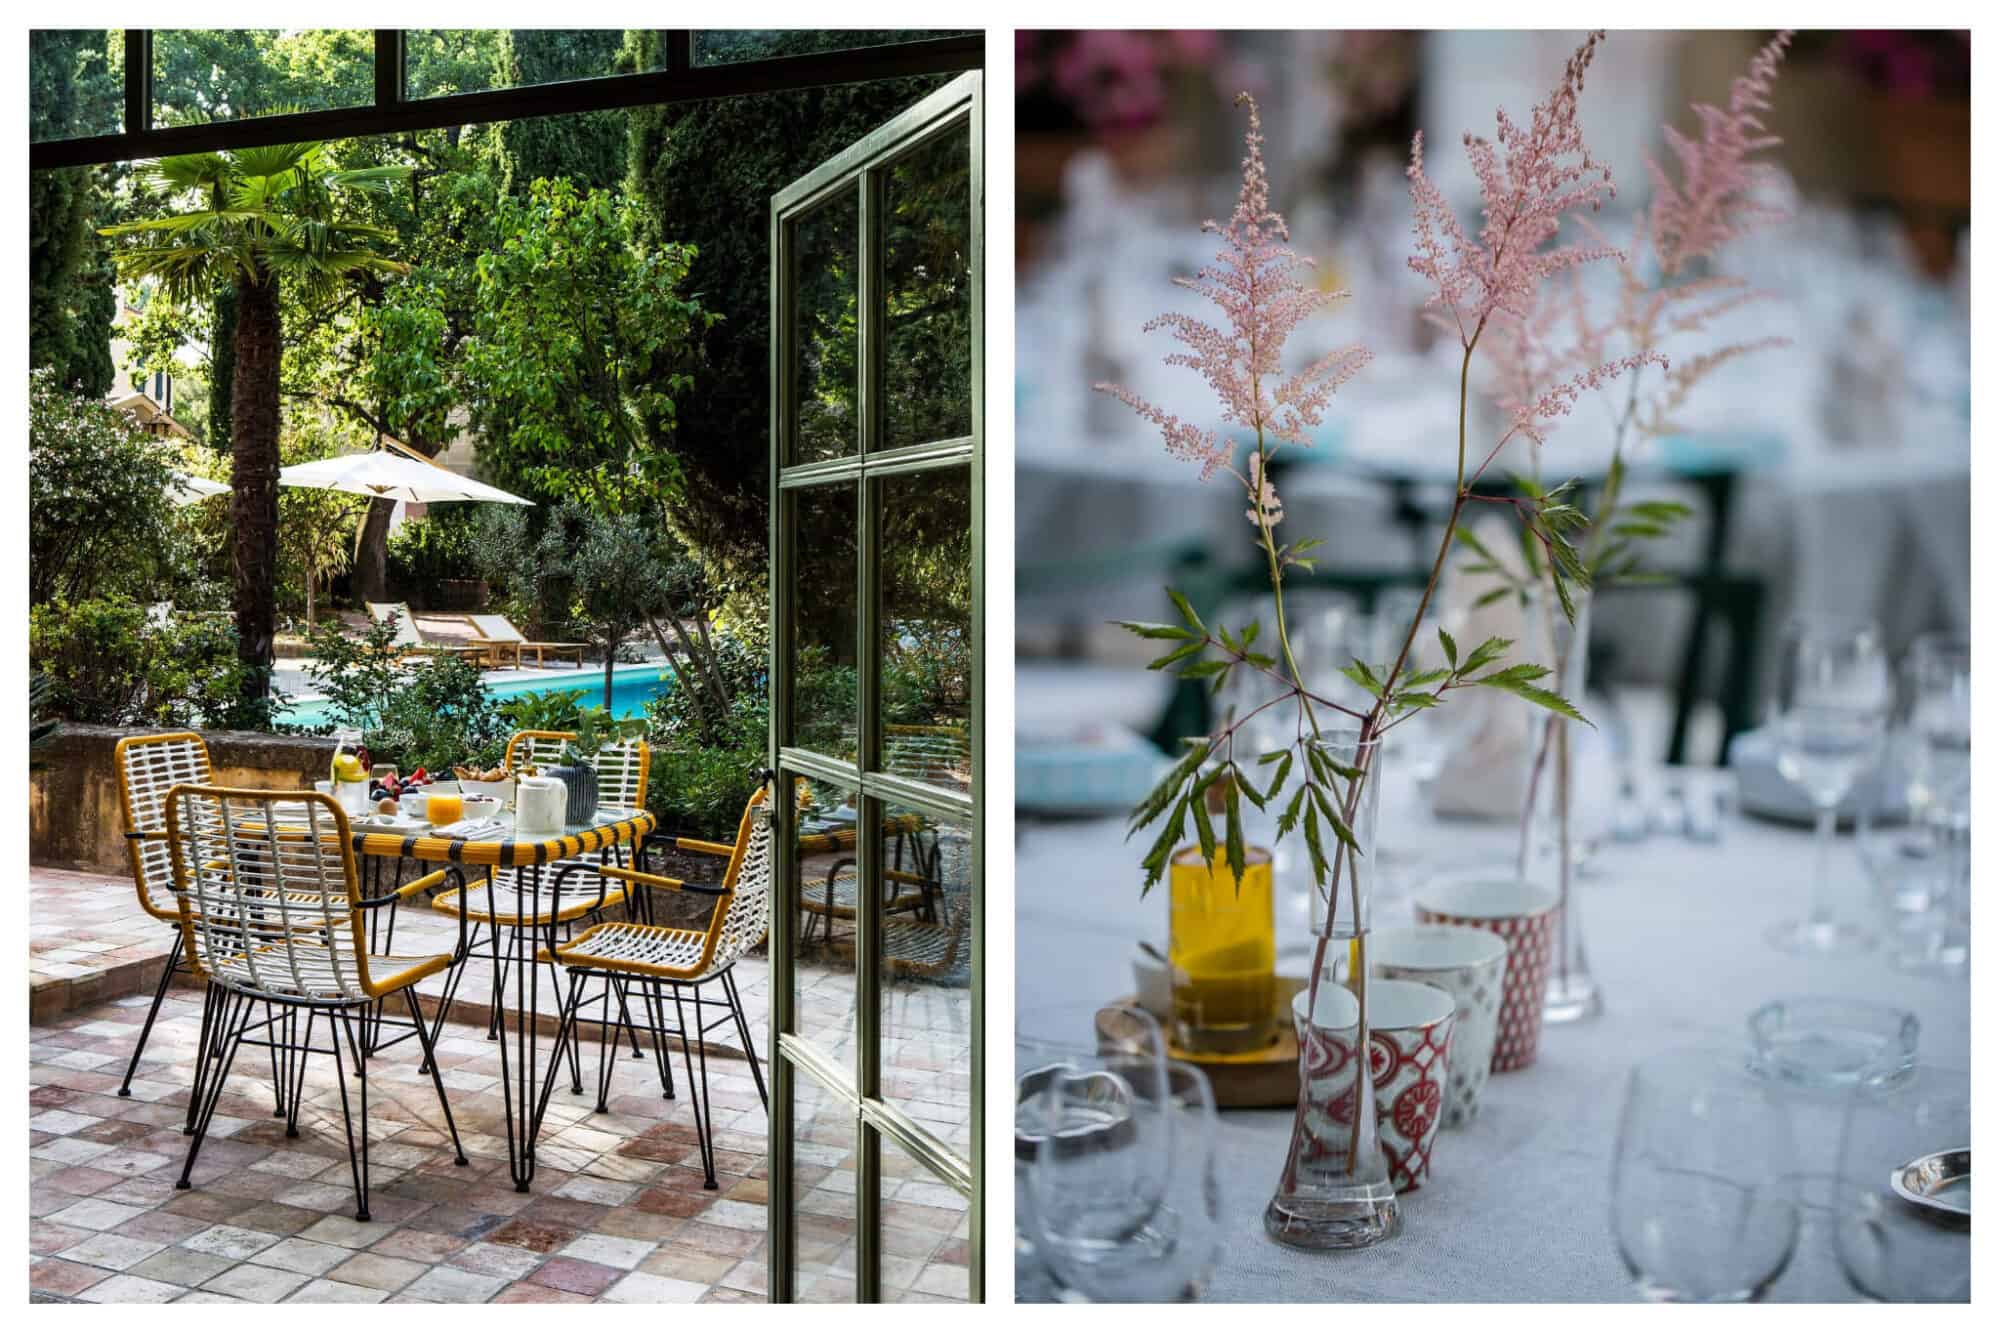 Left: A table is set for breakfast on the beautiful outdoor patio at Le Pigonnet hotel, with a view of the pool behind it, Right: A table is set with tableware and vases of pink flowers at Le Pigonnet